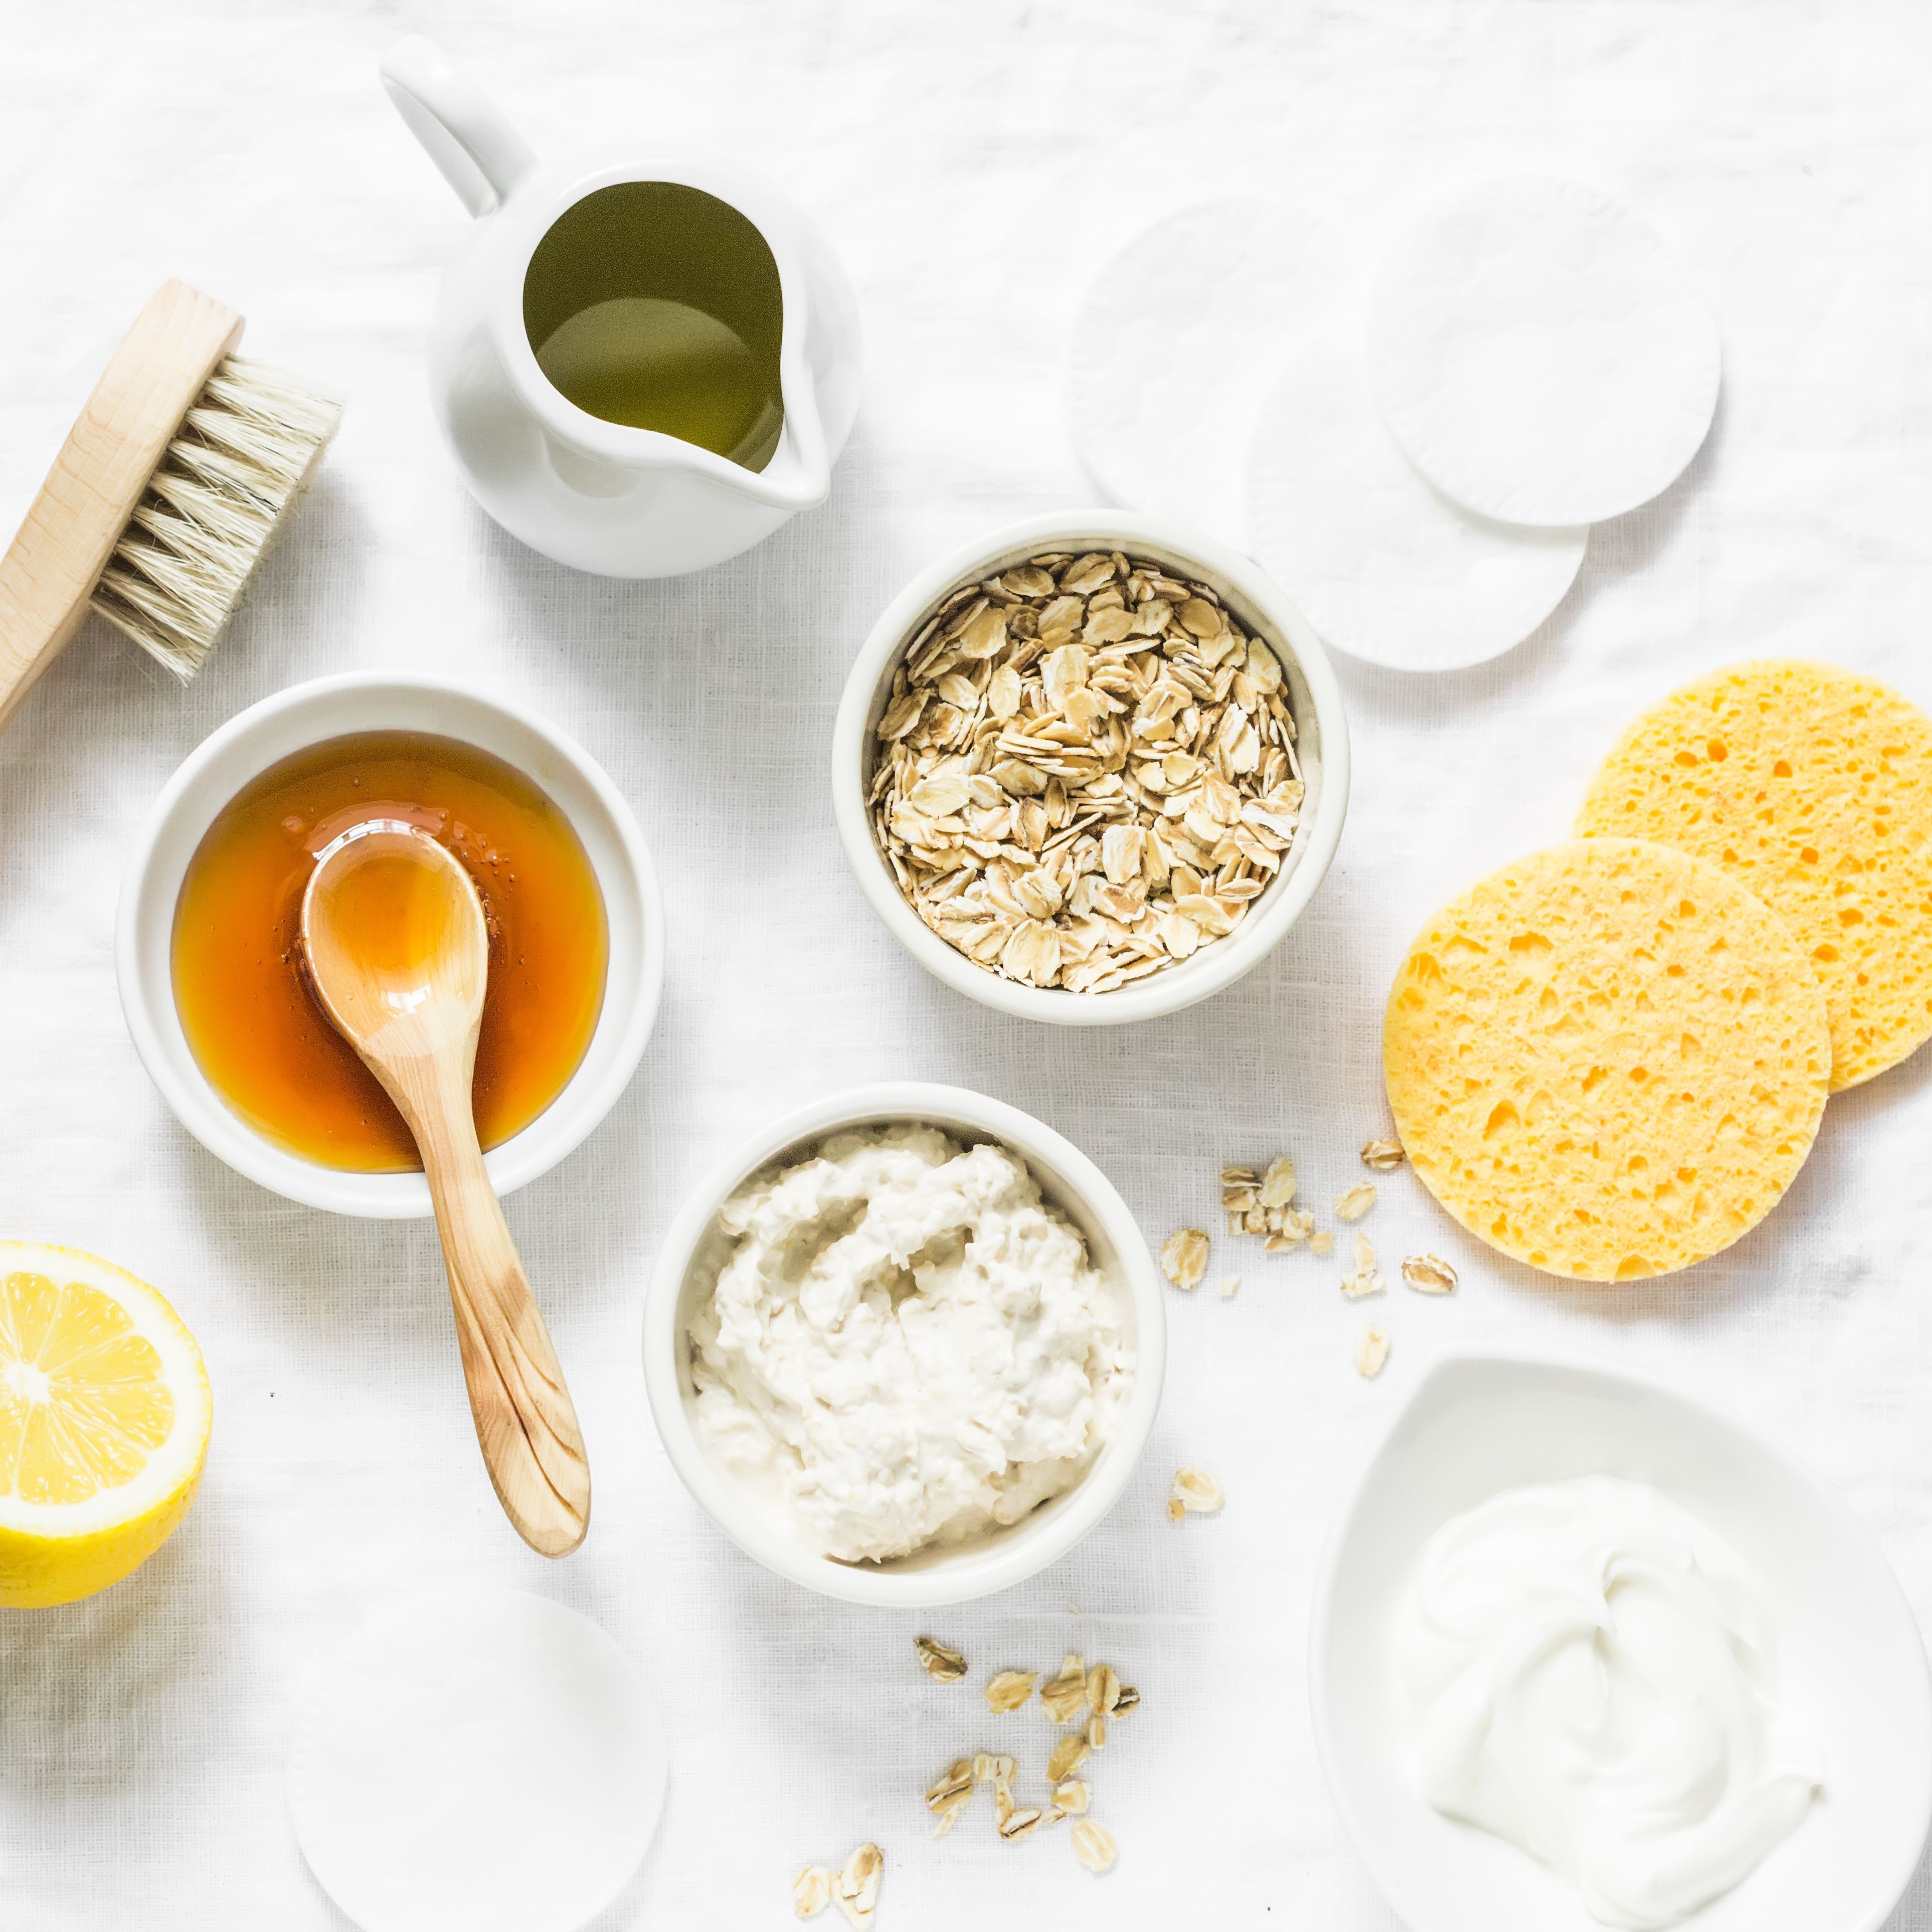 6 Simple Food Ingredients That Can Be Used As Face Masks - 41